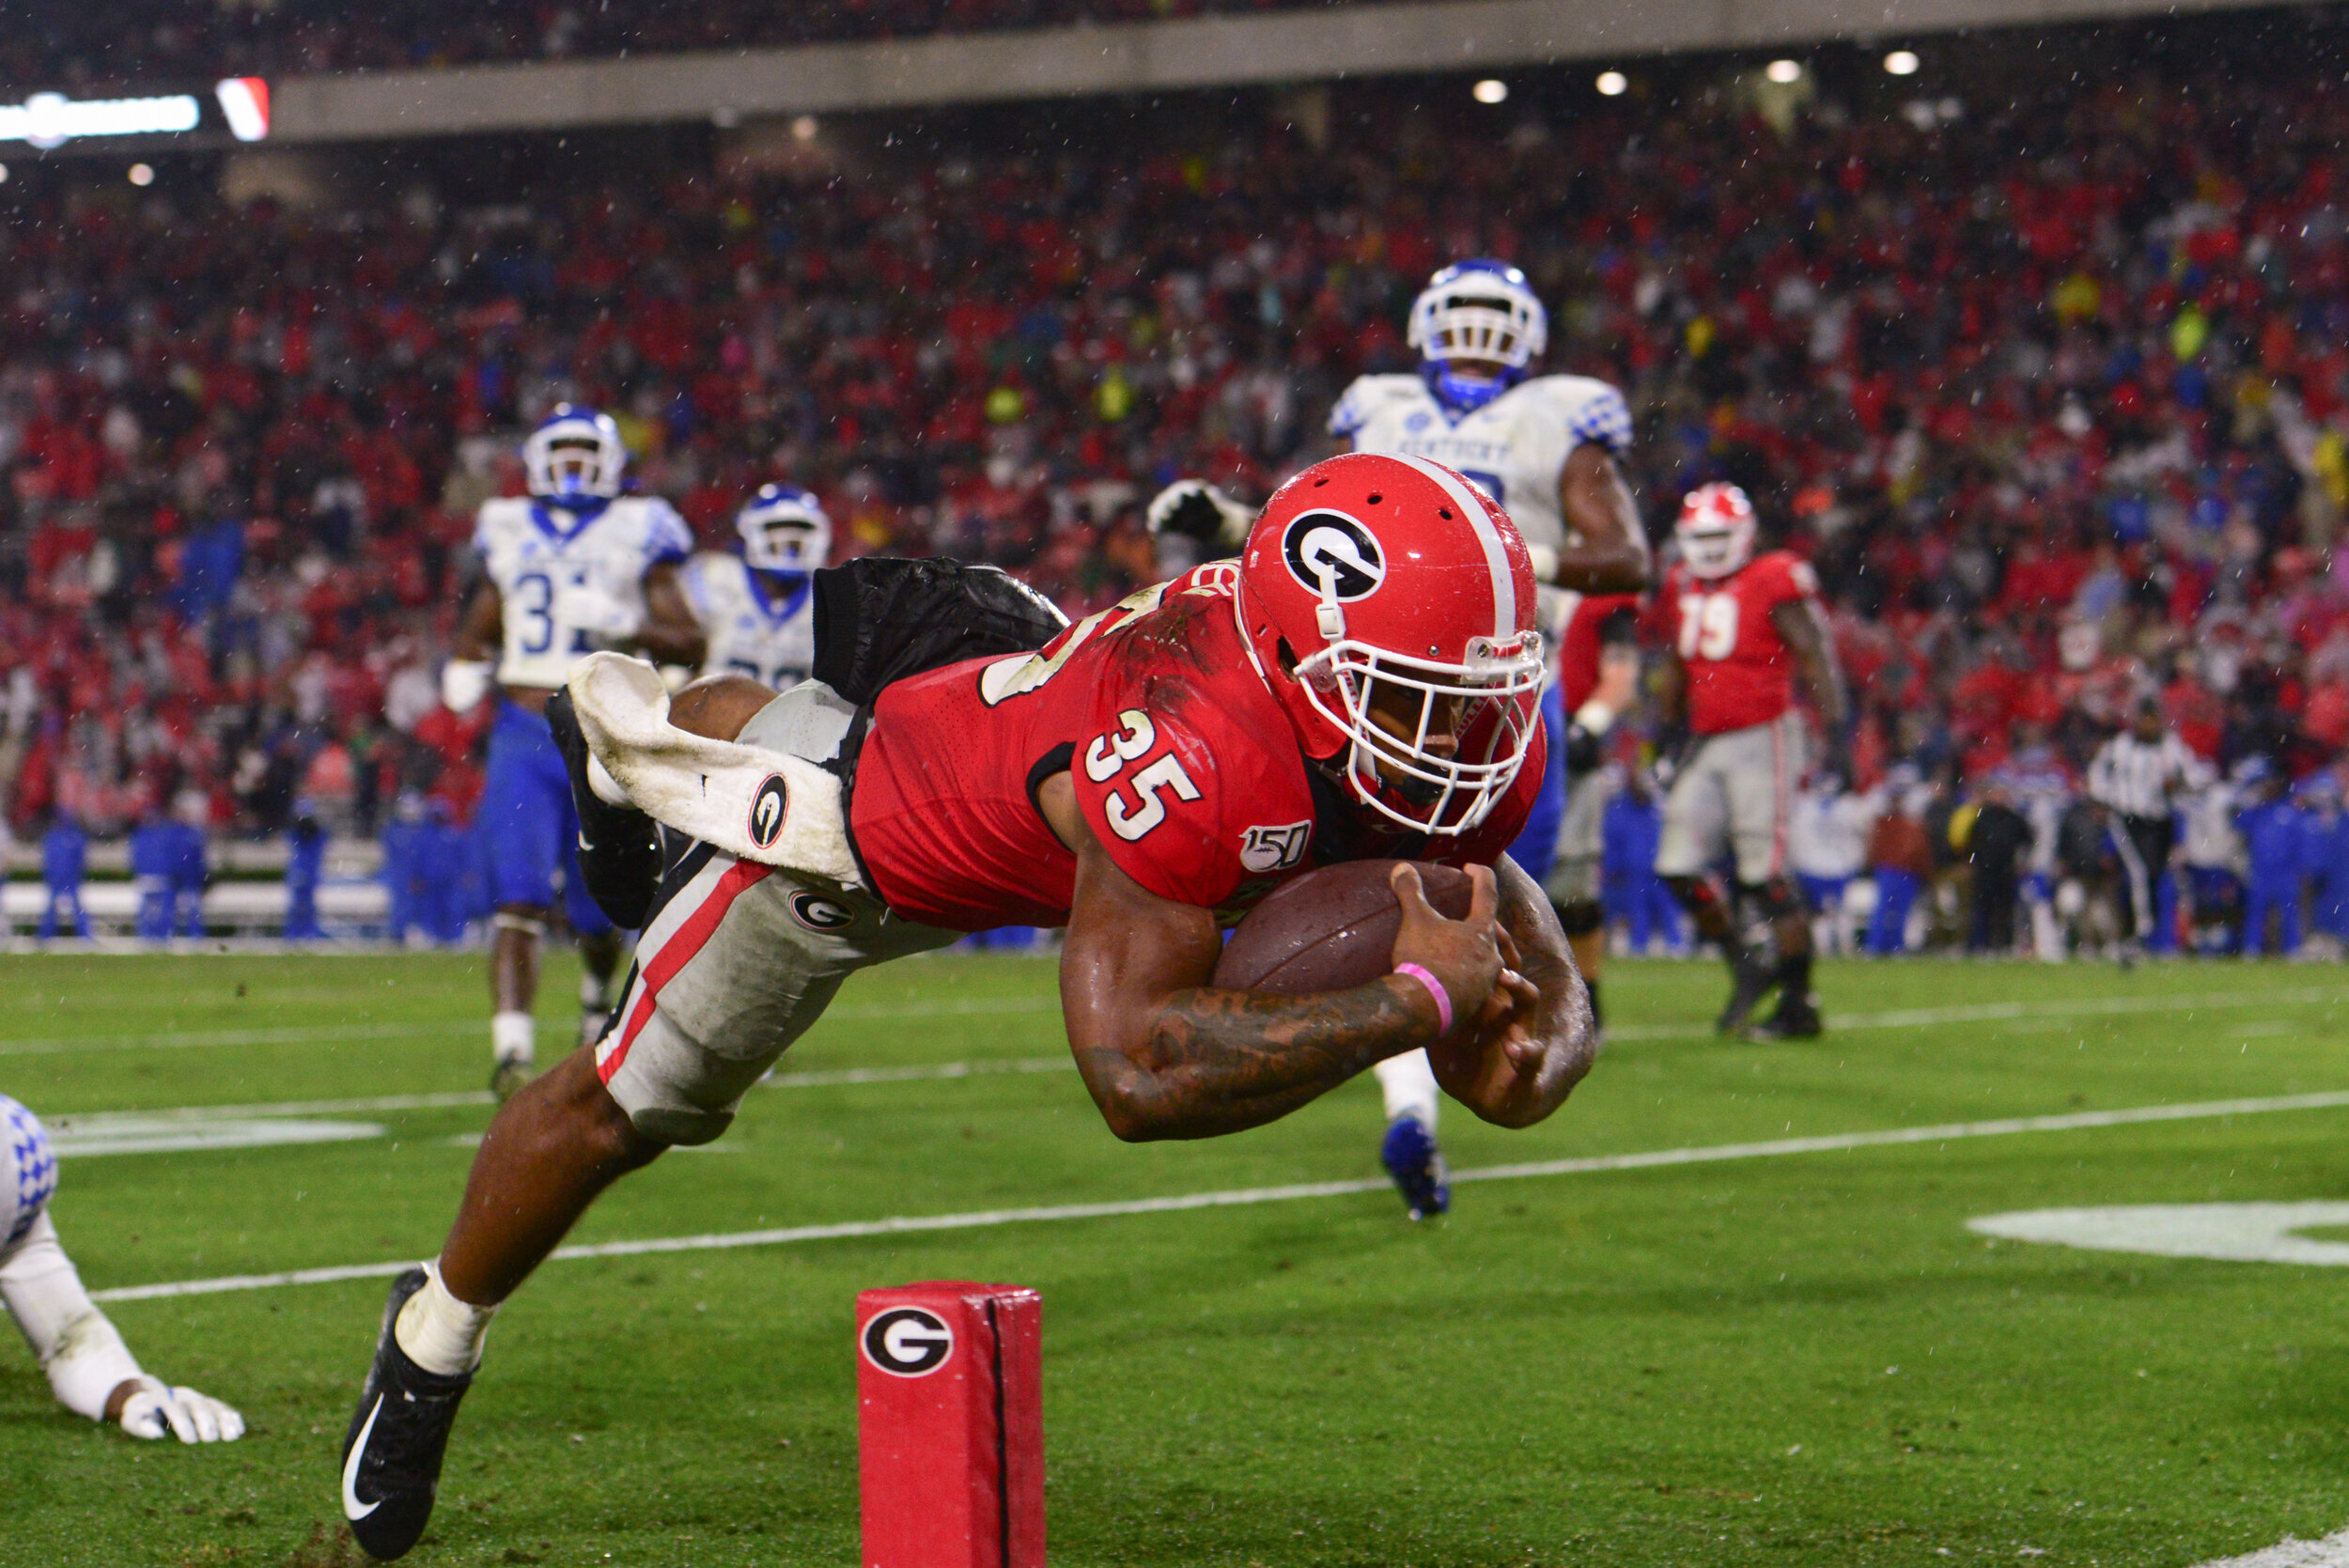  Georgia running back Brian Herrien (35) leaps into the end zone during a game against Kentucky on Oct. 19, 2019, in a soggy Sanford Stadium. Georgia defeated Kentucky 21-0. (Photo/Julian Alexander) 